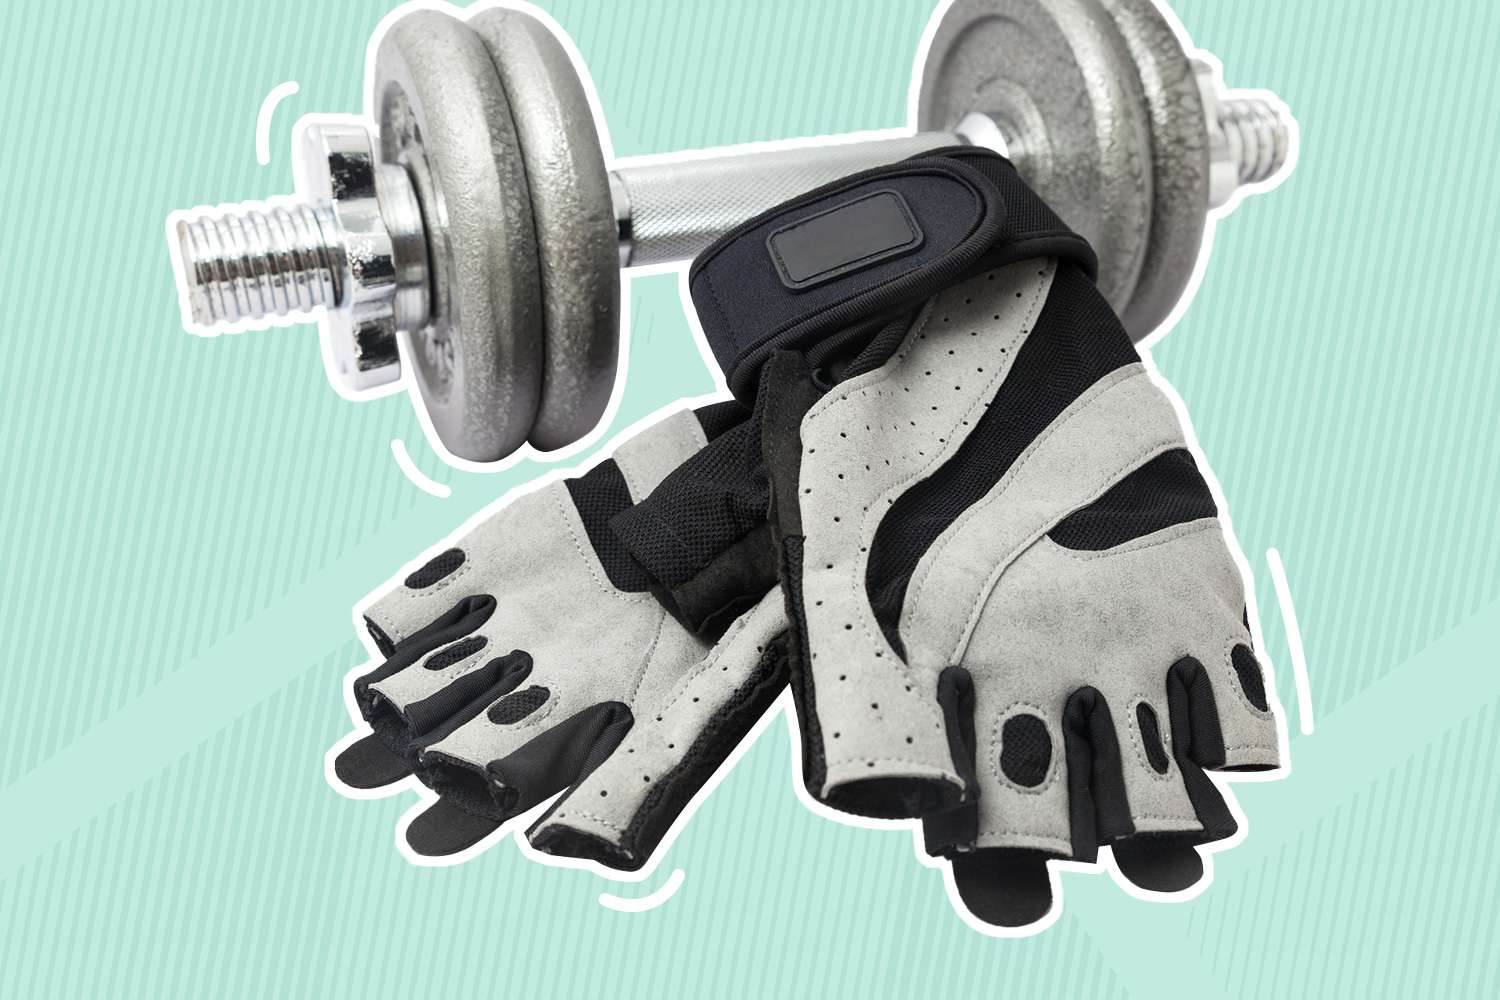 Weightlifting Gloves and dumbbell on a green background